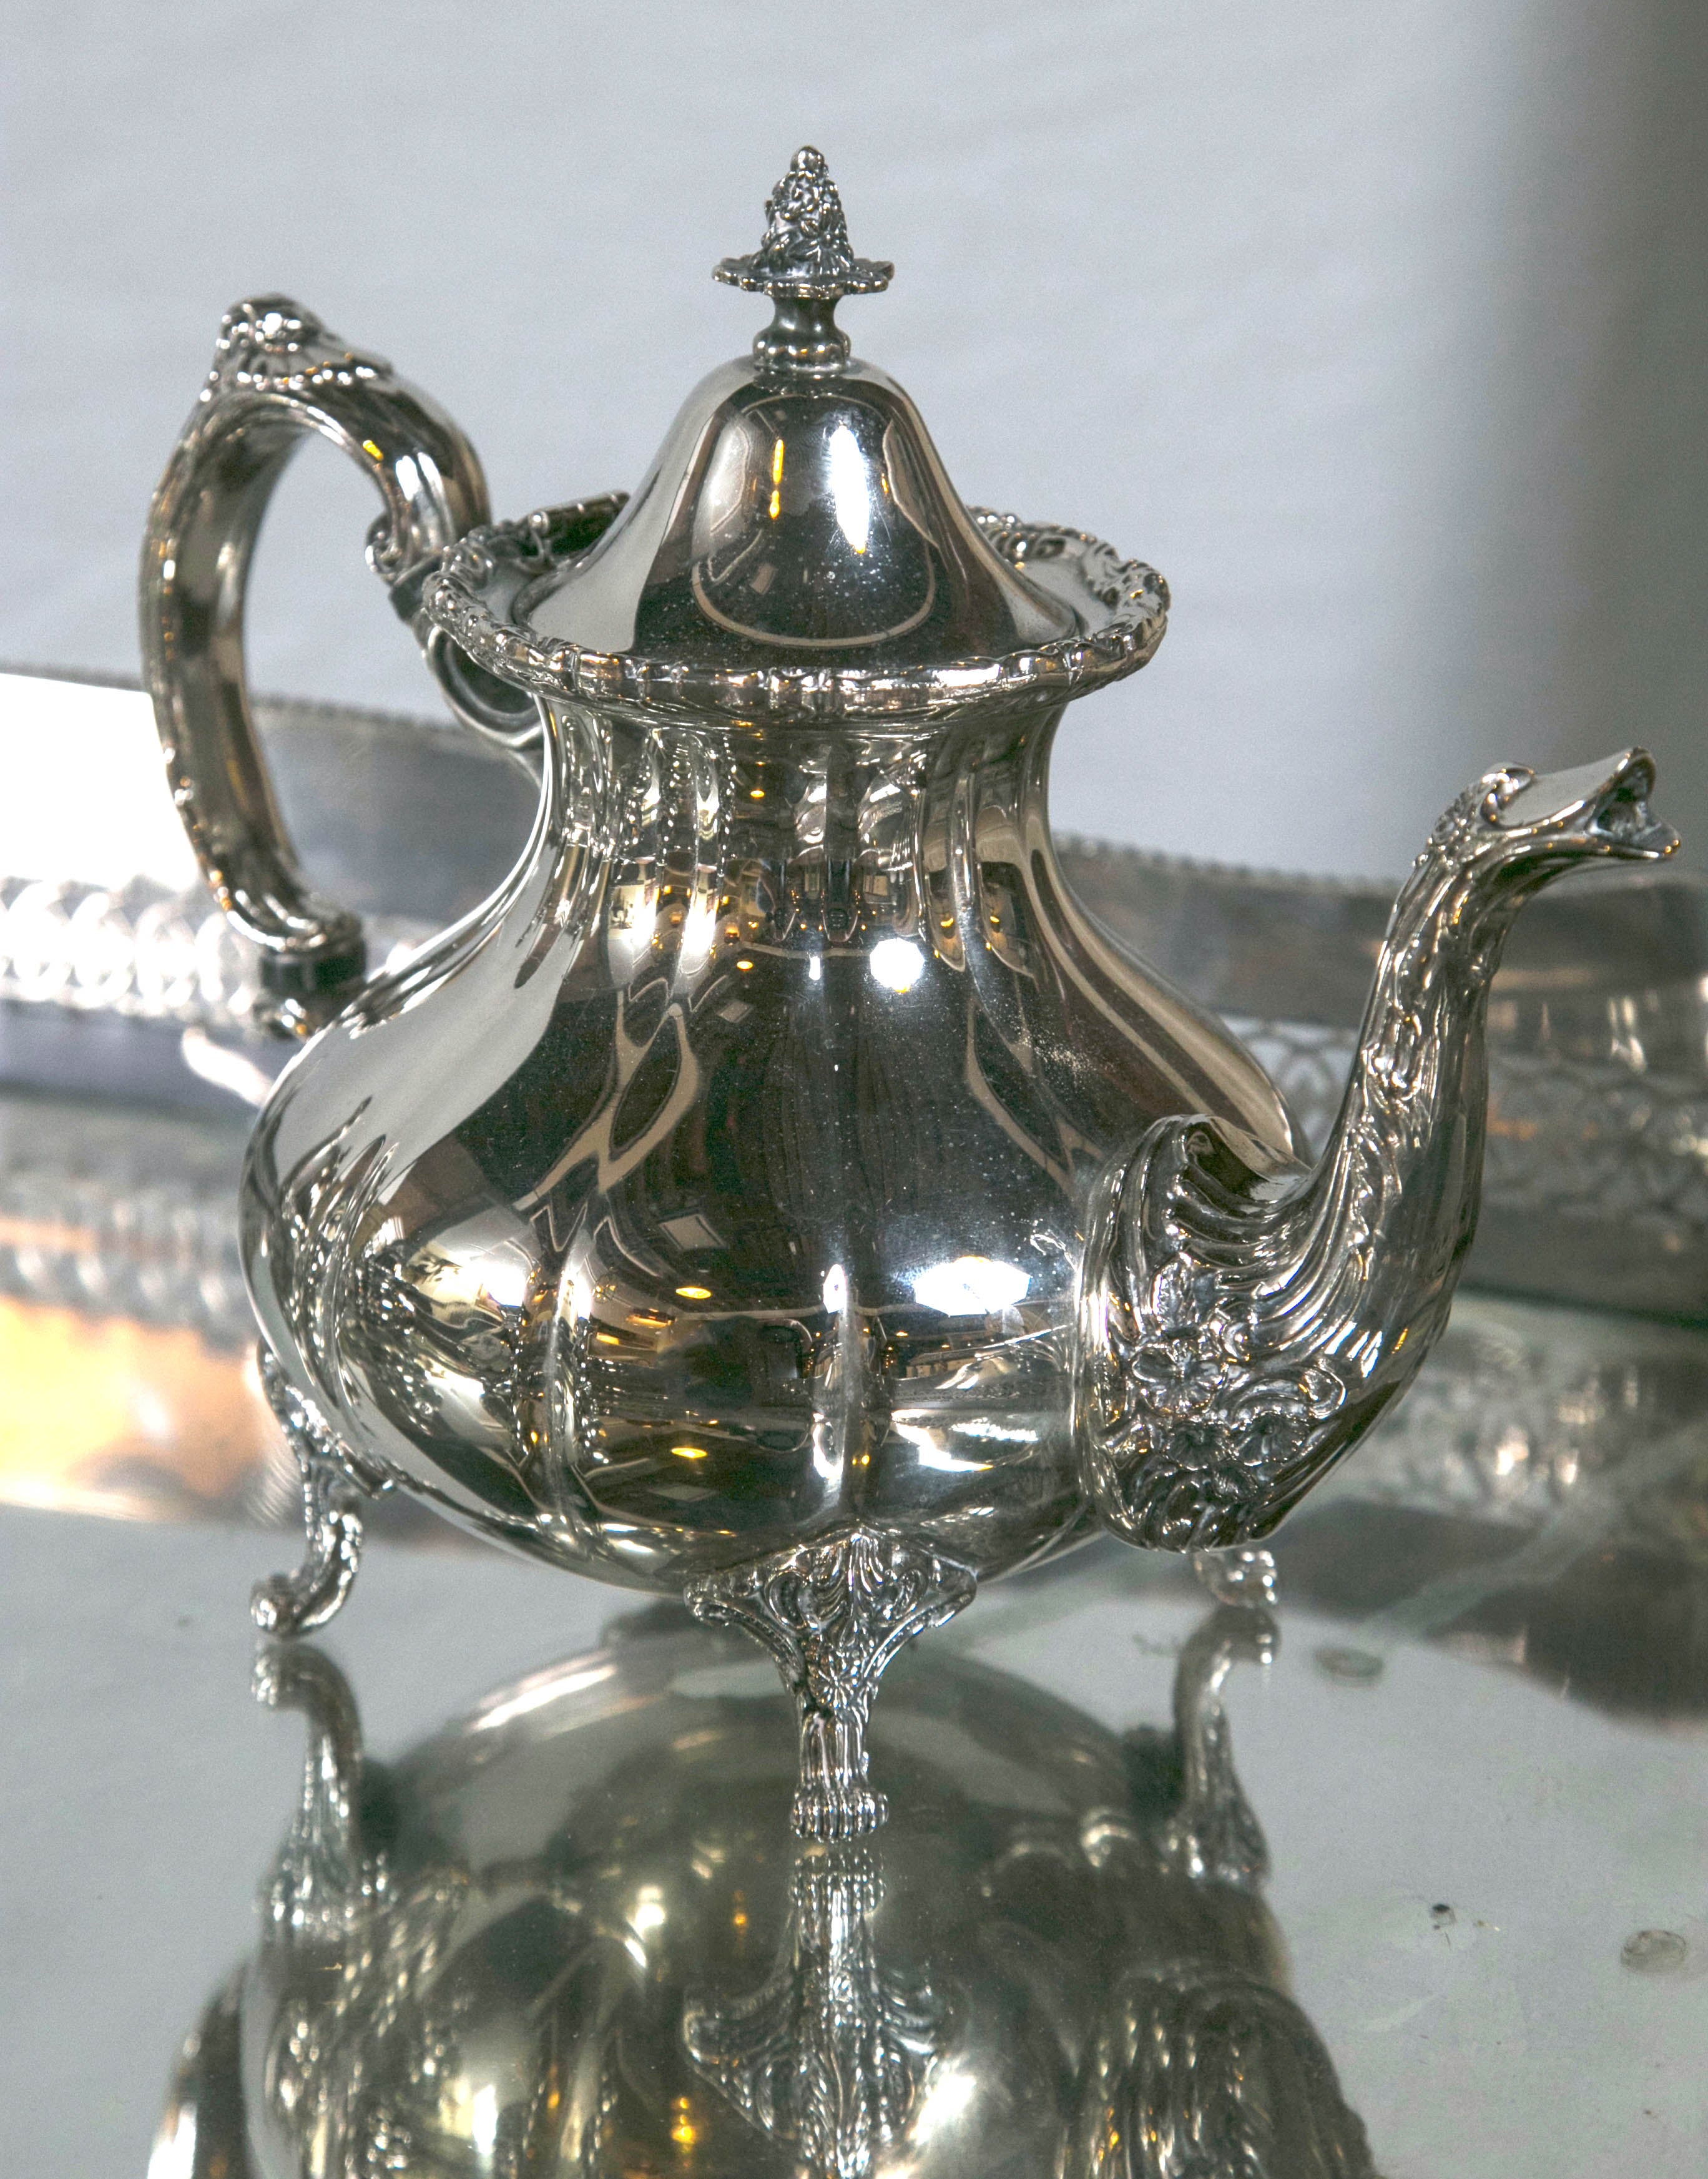 Hollywood Regency silver plated four tea service. A wonderful addition accent piece to any room setting. Tray and table not included. The largest piece measures 11 x 10 x 6.